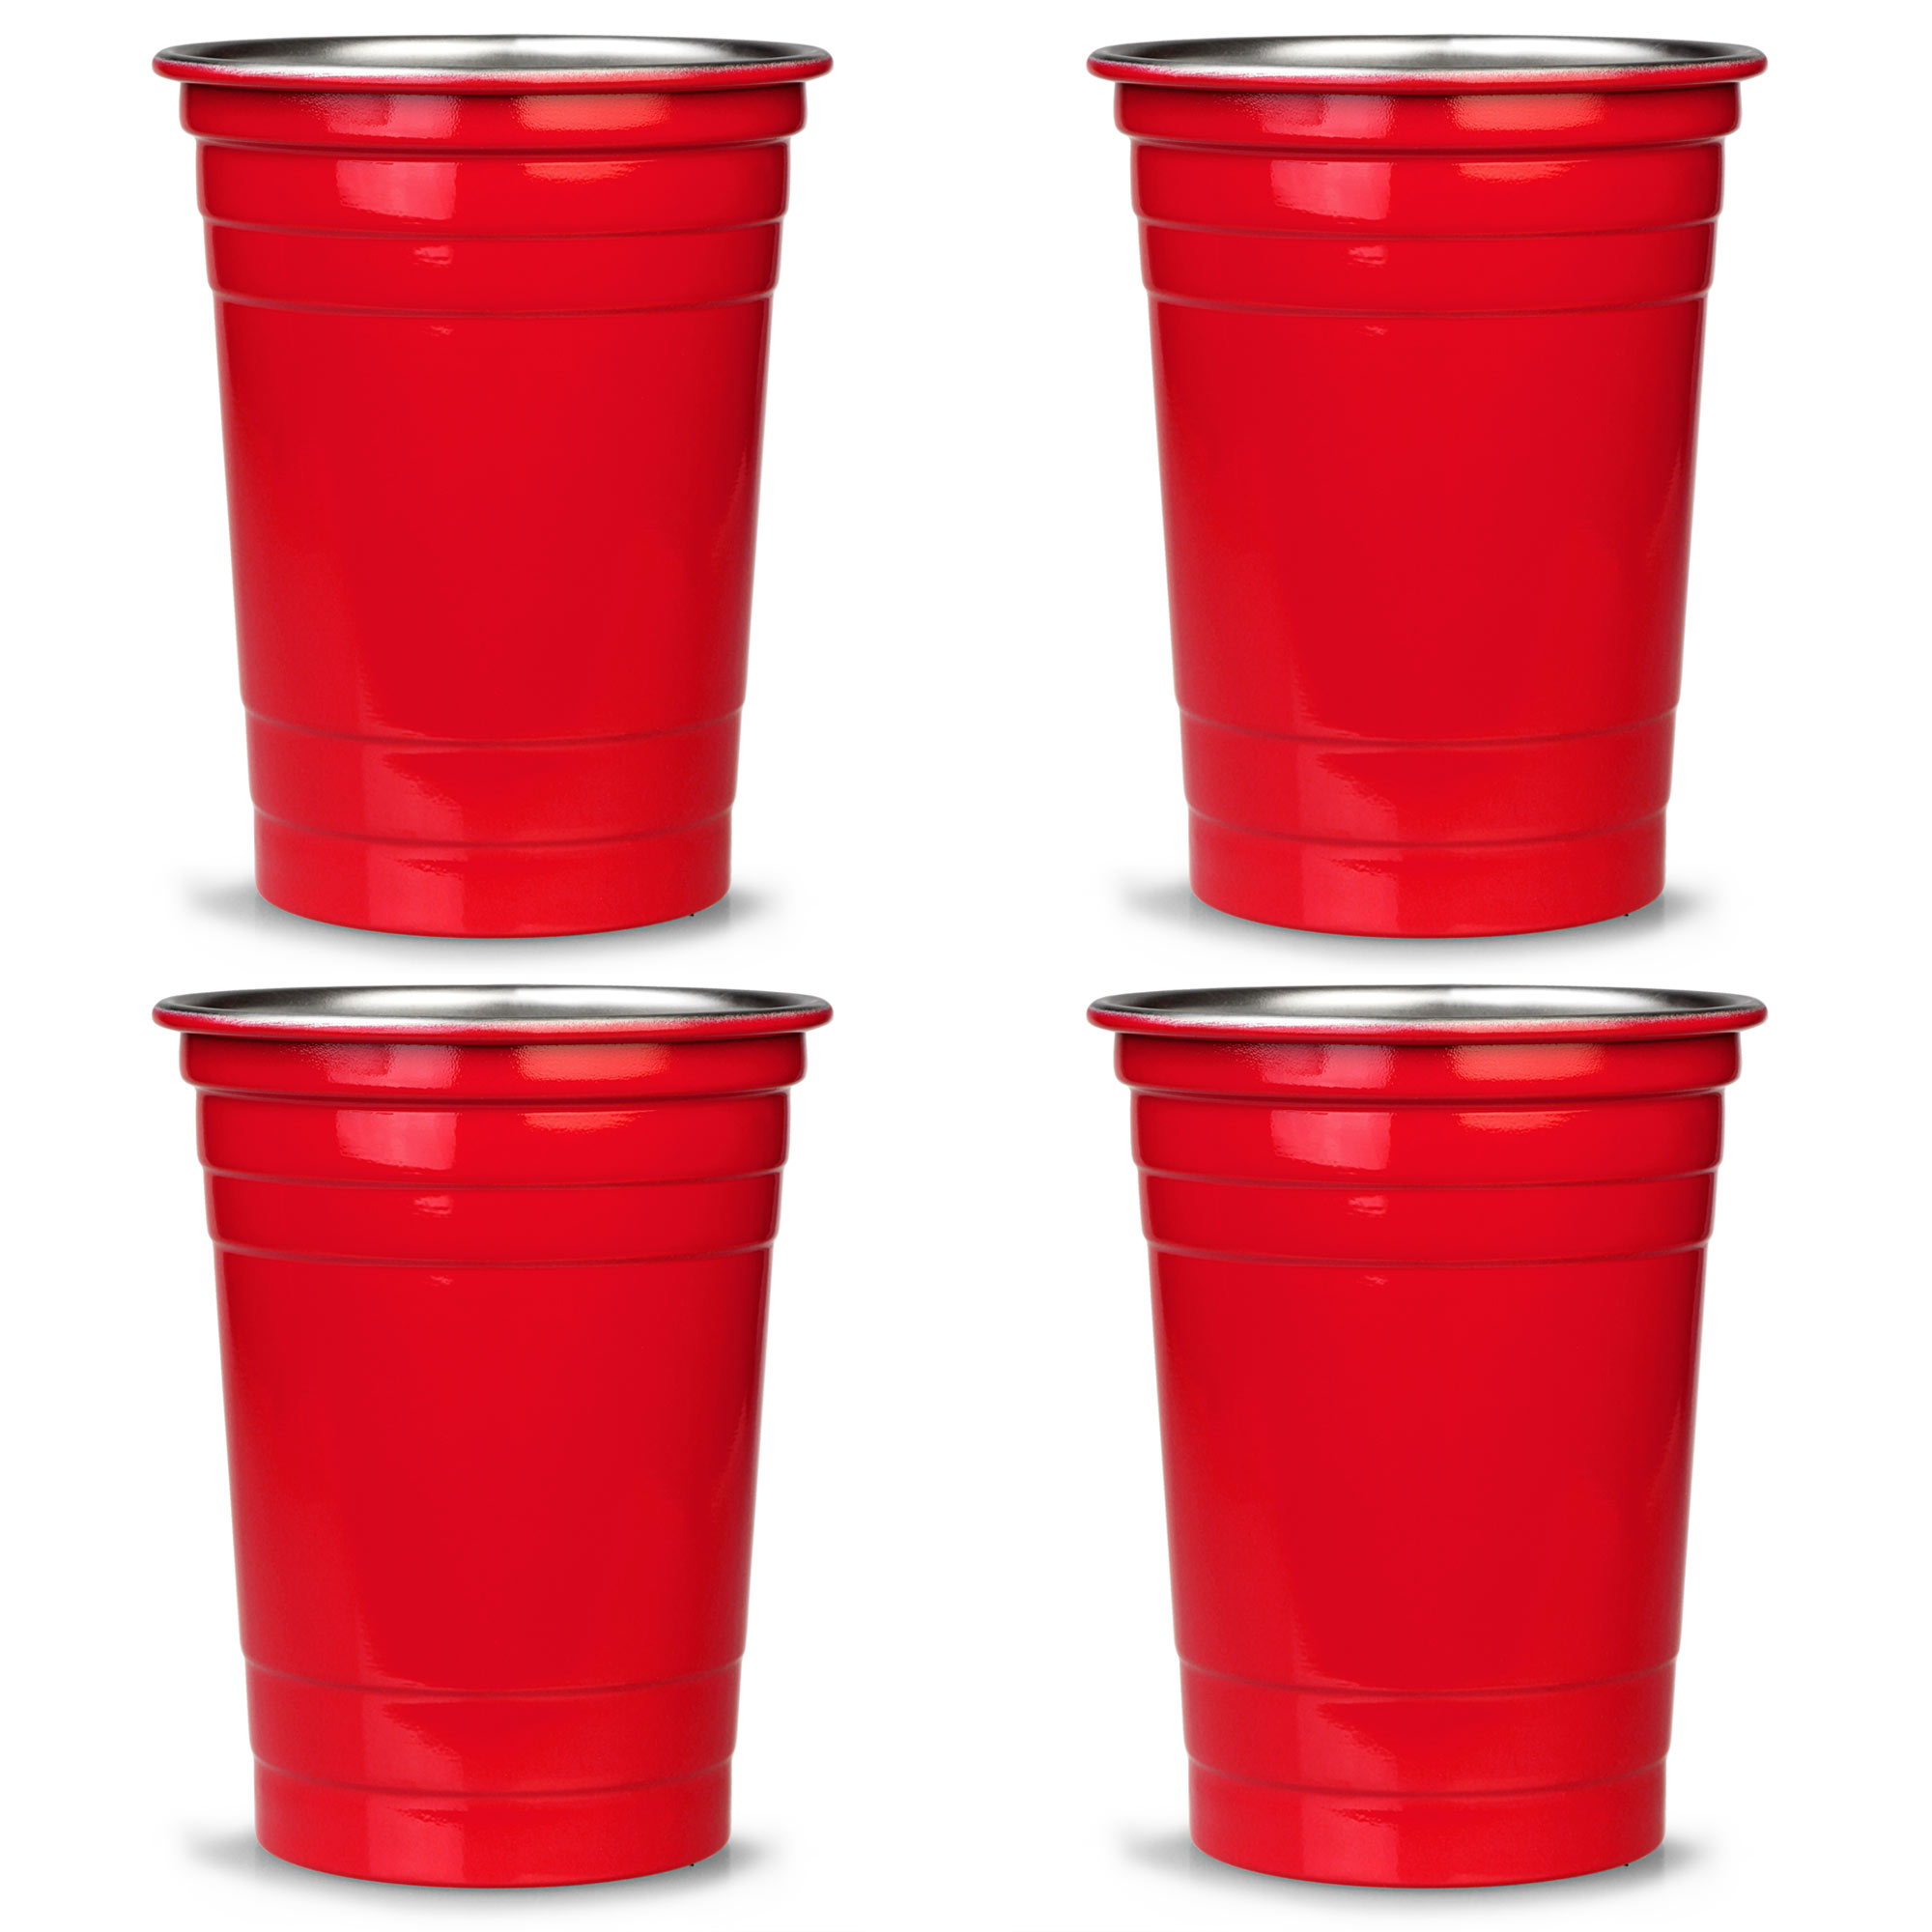 Stainless Steel Red American Party Cups 16oz / 455ml | Drinkstuff